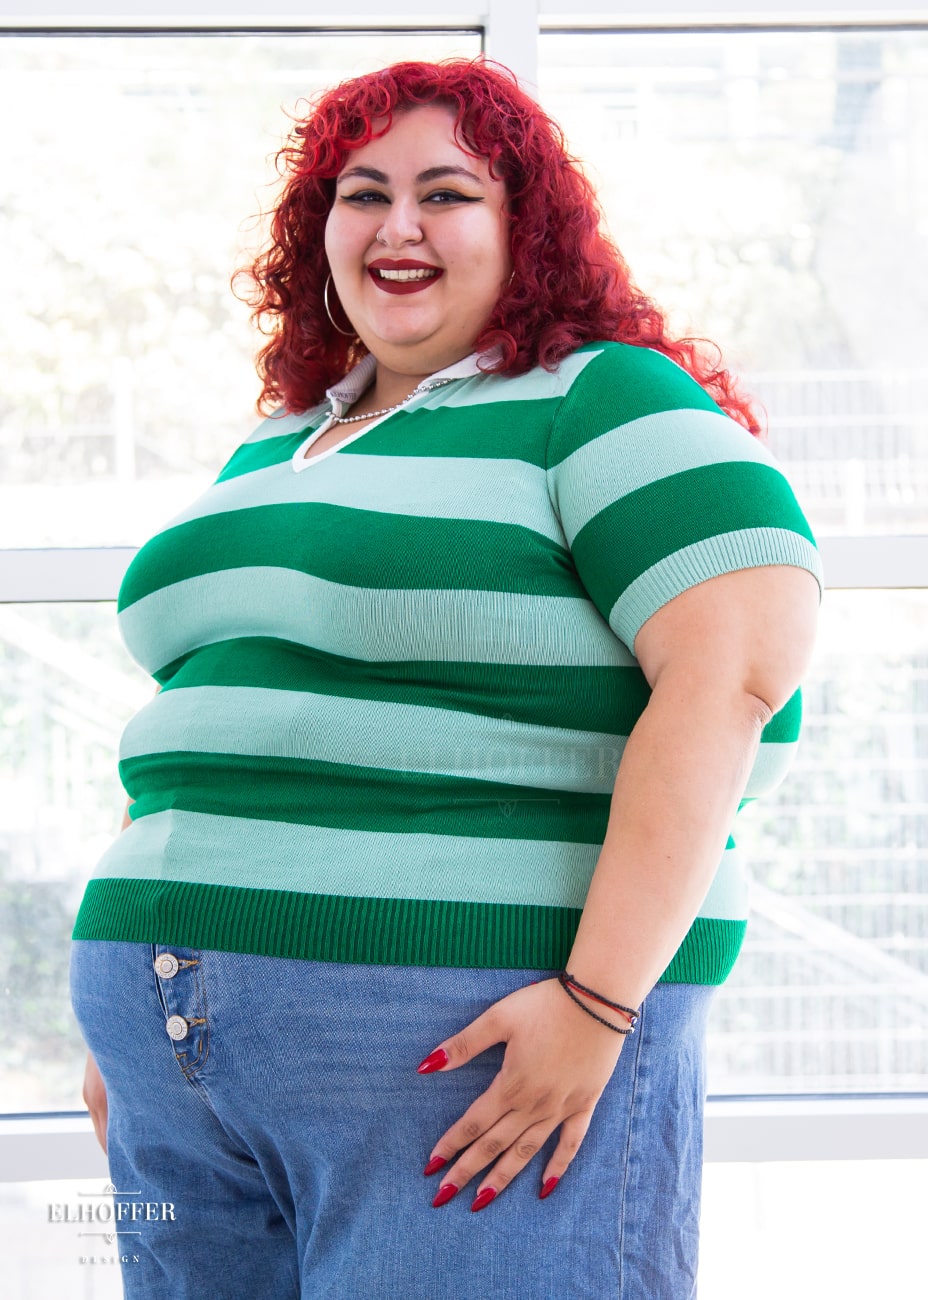 Victoria, an olive skinned 4XL model with bright red curly hair, is wearing a pullover fitted lightweight sweater with short sleeves and split neck with a small white collar. It's dark green with lighter green thick stripes running horizontally.